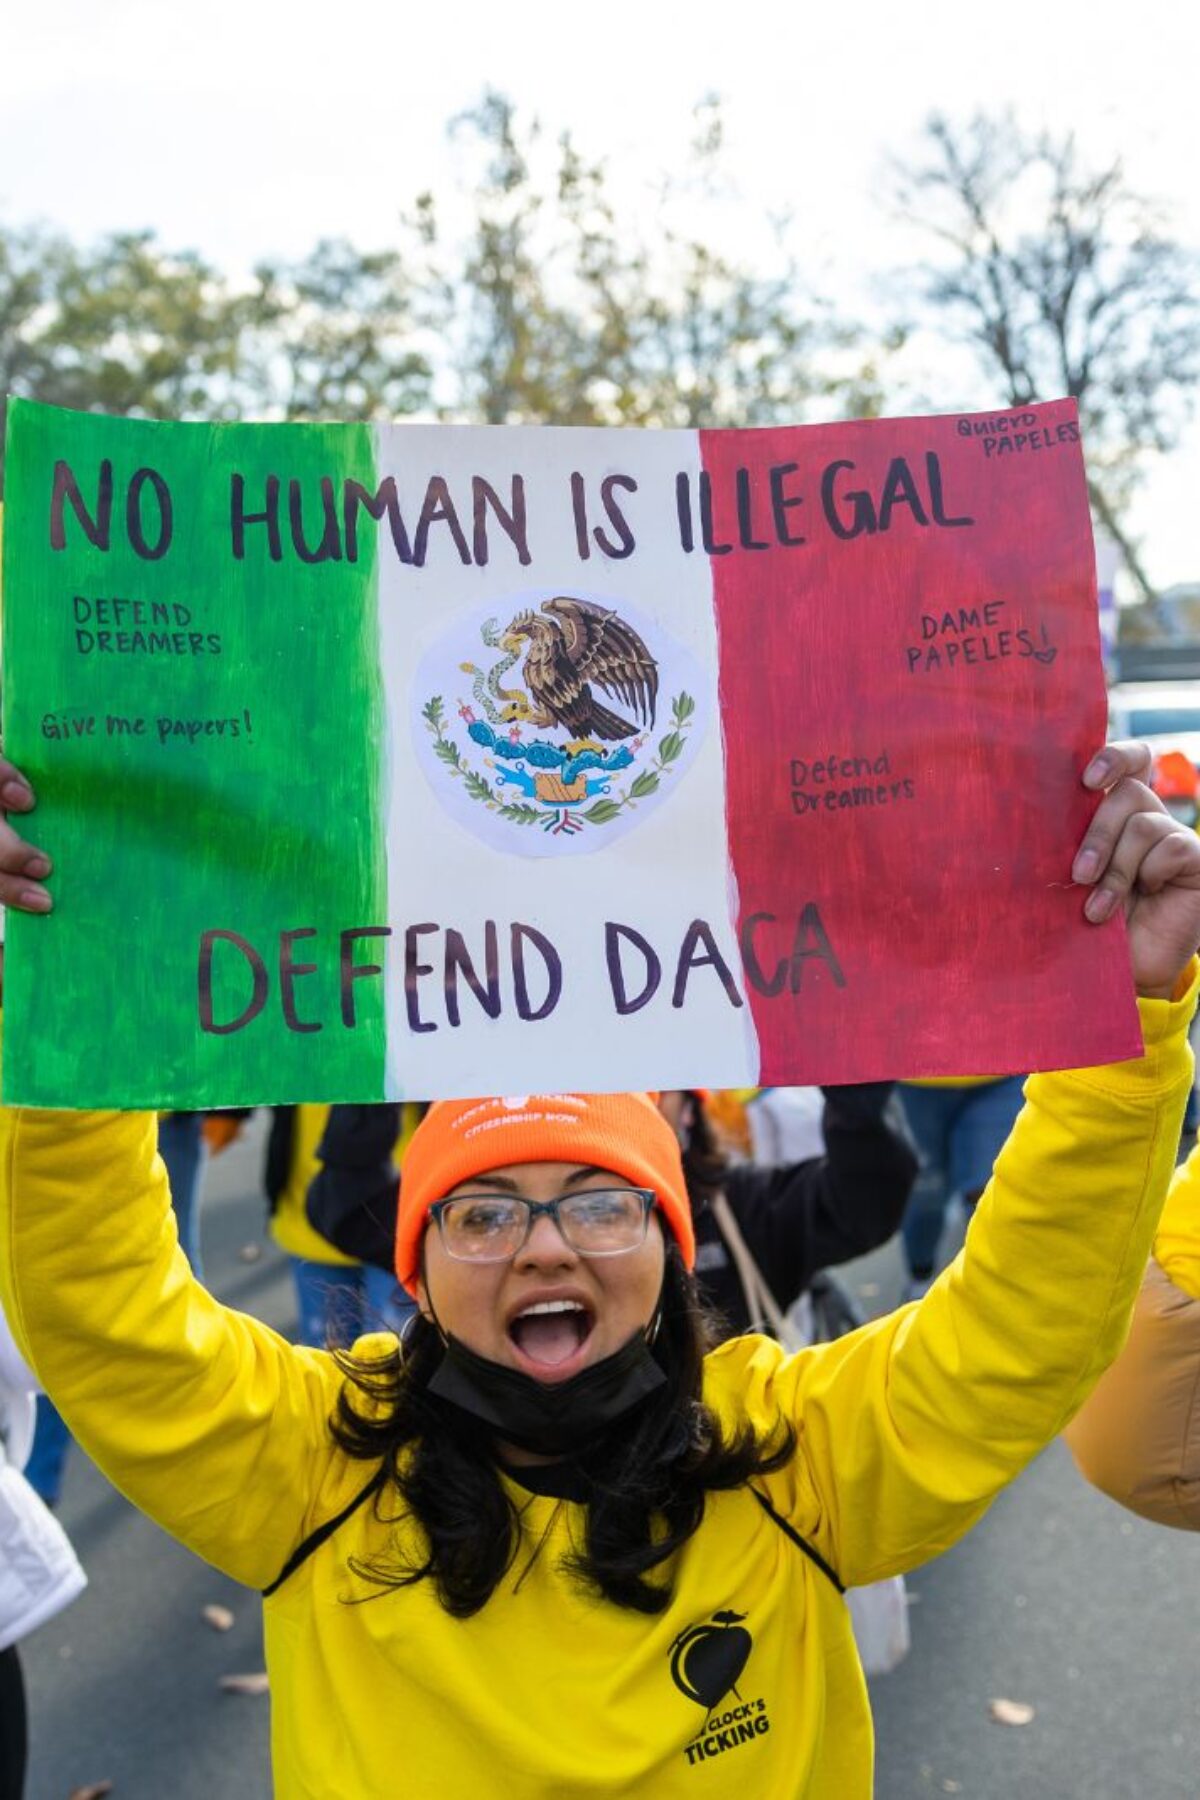 WASHINGTON, DC, UNITED STATES- NOVEMBER 17: Pro- DACA protestors hold a march outside of the U.S. Capitol Building calling for a pathway to citizenship on November 17th, 2022 in Washington, DC. (Photo by Nathan Posner/Anadolu Agency via Getty Images)